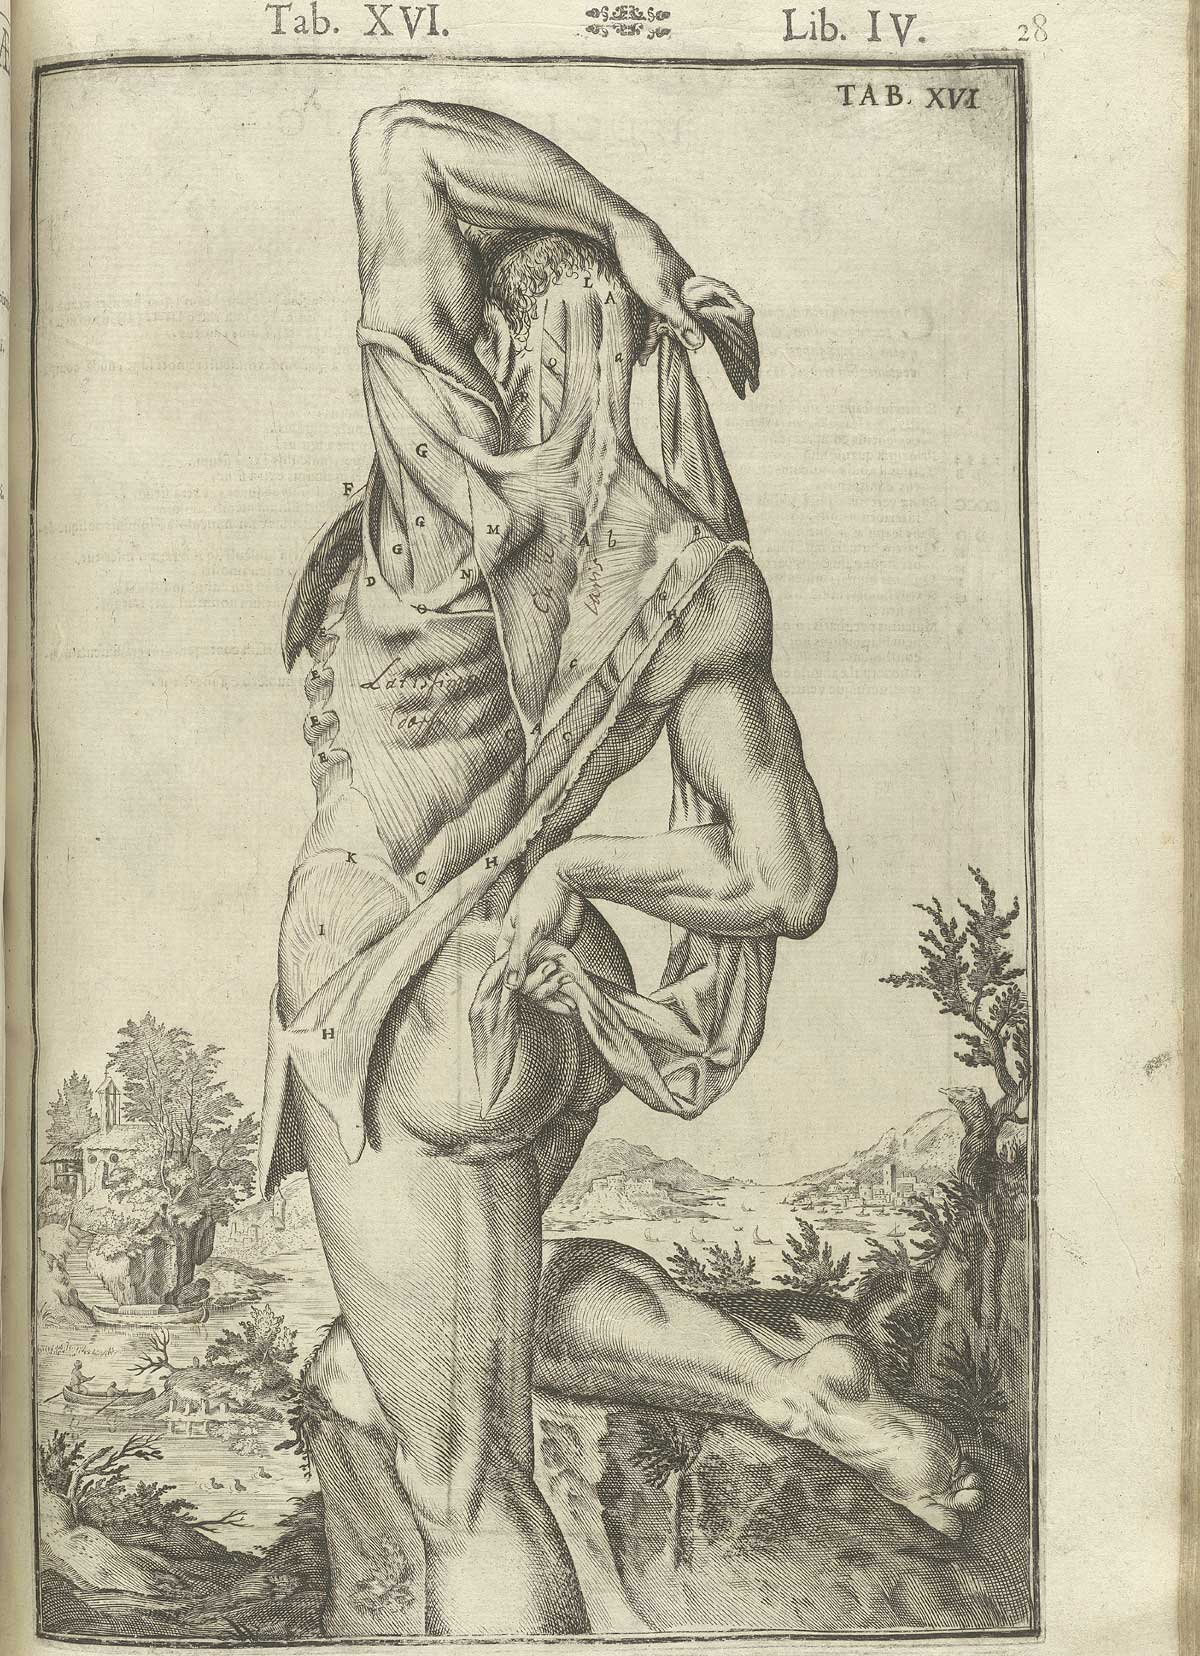 Engraving showing a nude male anatomical figure in a pastoral setting standing with his back to the viewer especially revealing the deltoids, trapezius, and latissimus dorsi muscles, with his left hand up over his head and his right behind the small of his back holding the ends of a sheet in a provocative fashion, with the rest of his skin pulled away from his back revealing other musculature; from Adriaan van de Spiegel and Giulio Cassieri’s De humani corporis fabrica libri decem, Venice, 1627, NLM call no. WZ 250 S755dh 1627.